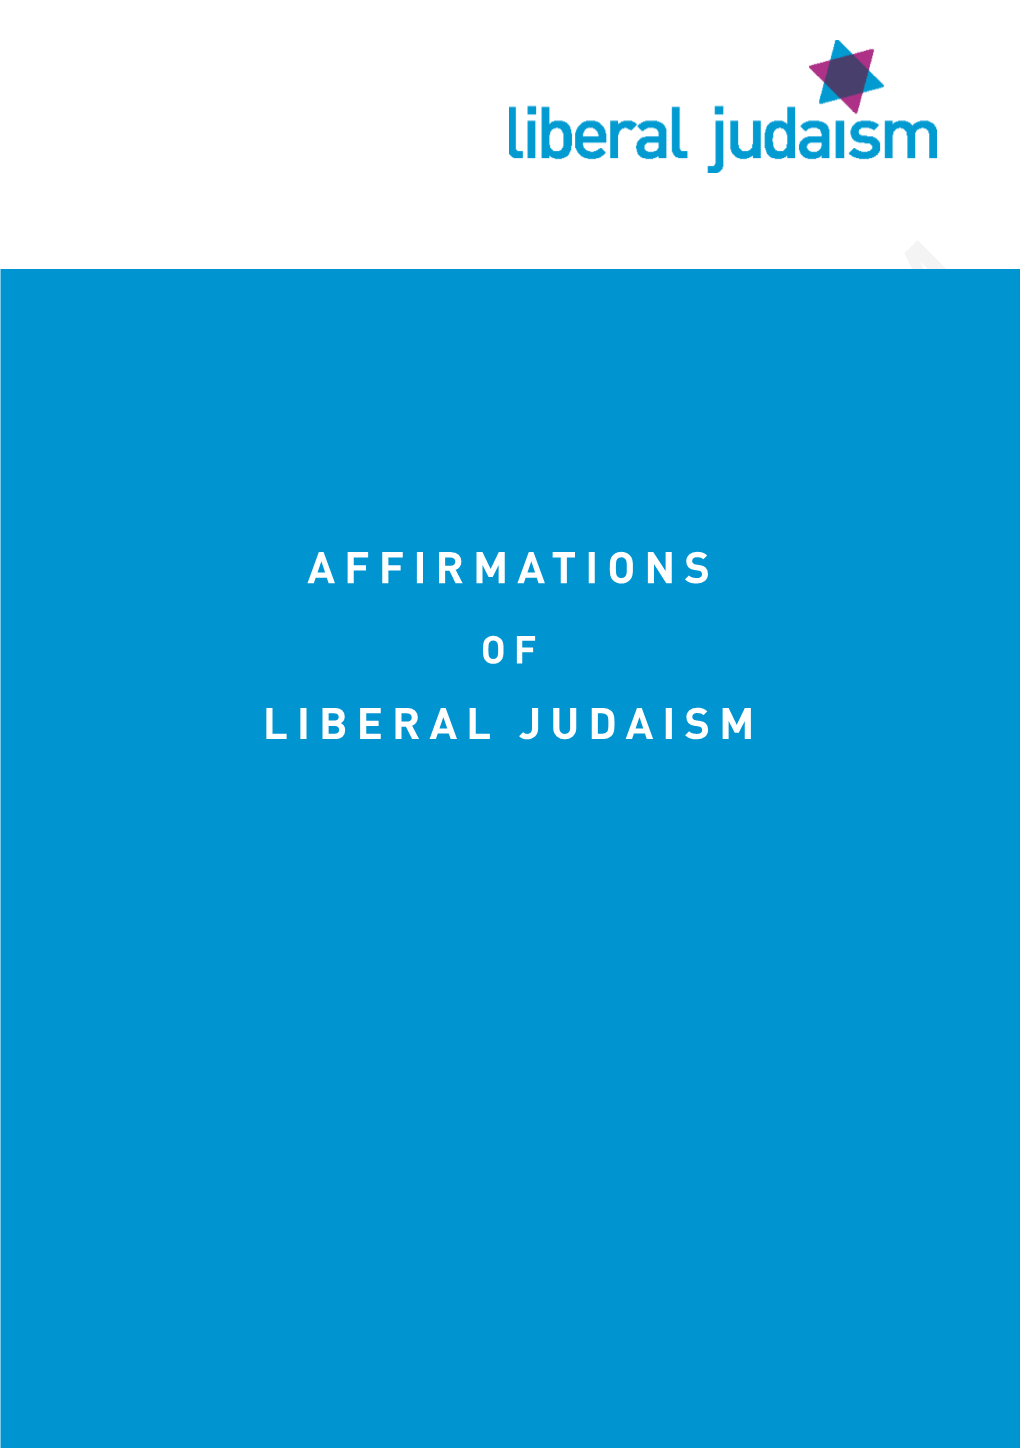 Affirmations of Liberal Judaism Booklet July 2017.Indd 1 14/07/2017 14:48 JUDAISM